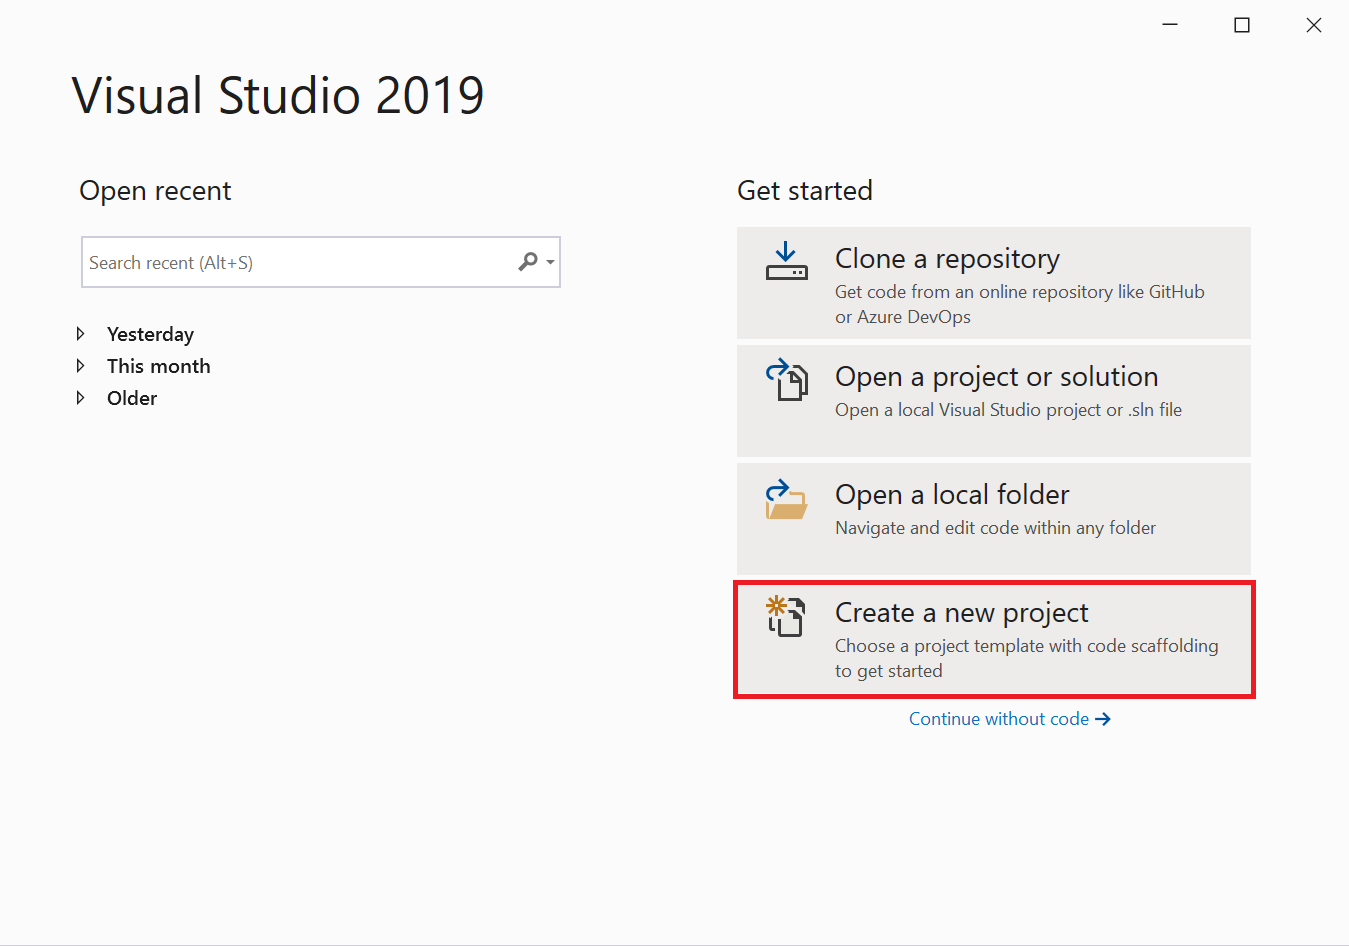 Screenshot of the 'Create a new project' window in Visual Studio 2019.